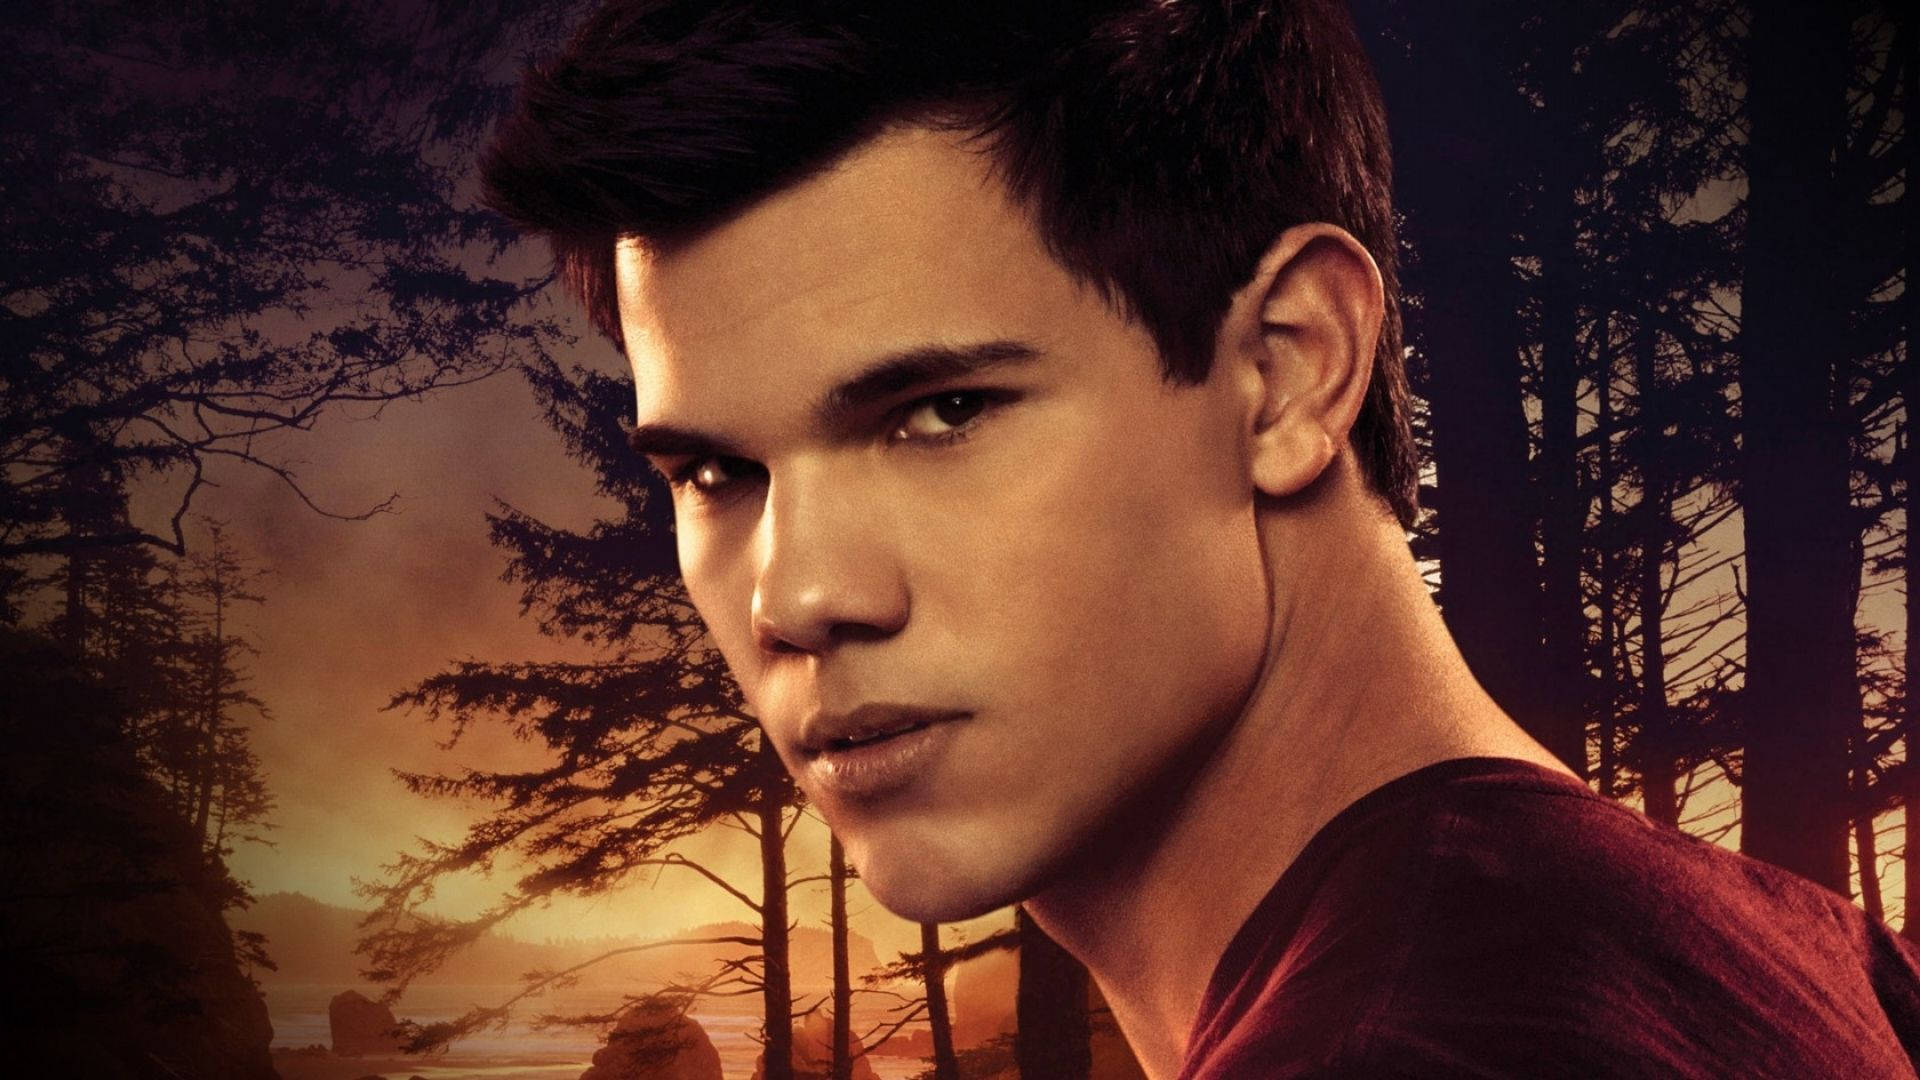 Hollywood Actor Taylor Lautner In Twilight Series Background